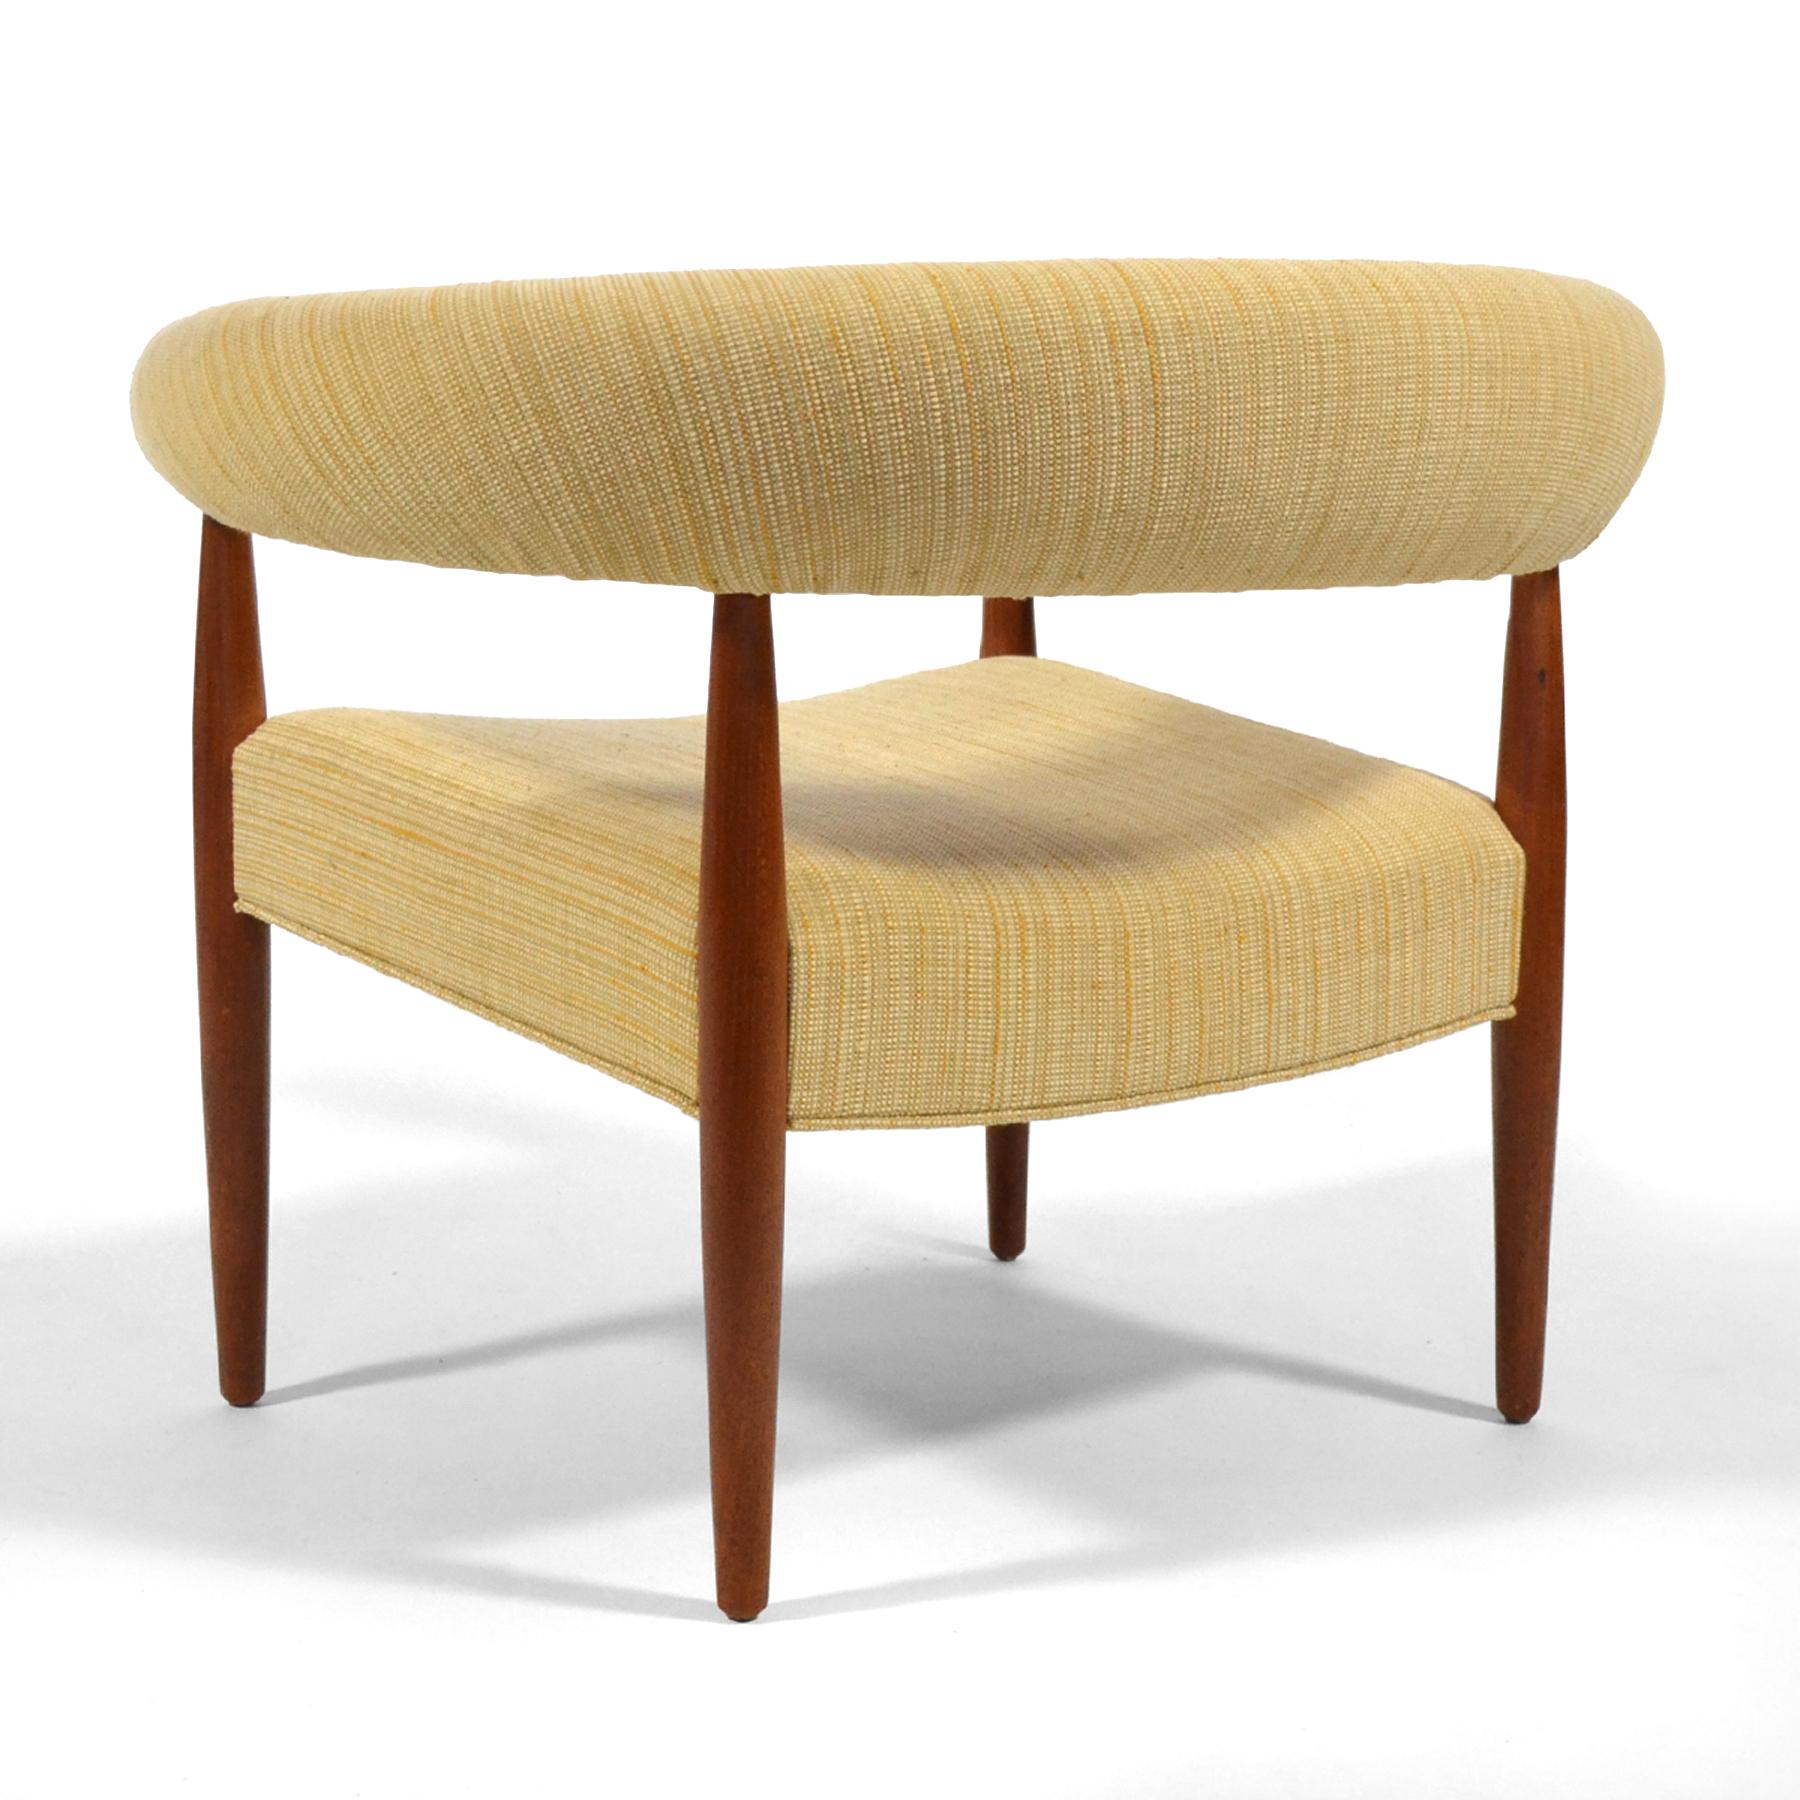 Mid-20th Century Nanna Ditzel Early Ring Chair by Poul Kolds Savværk